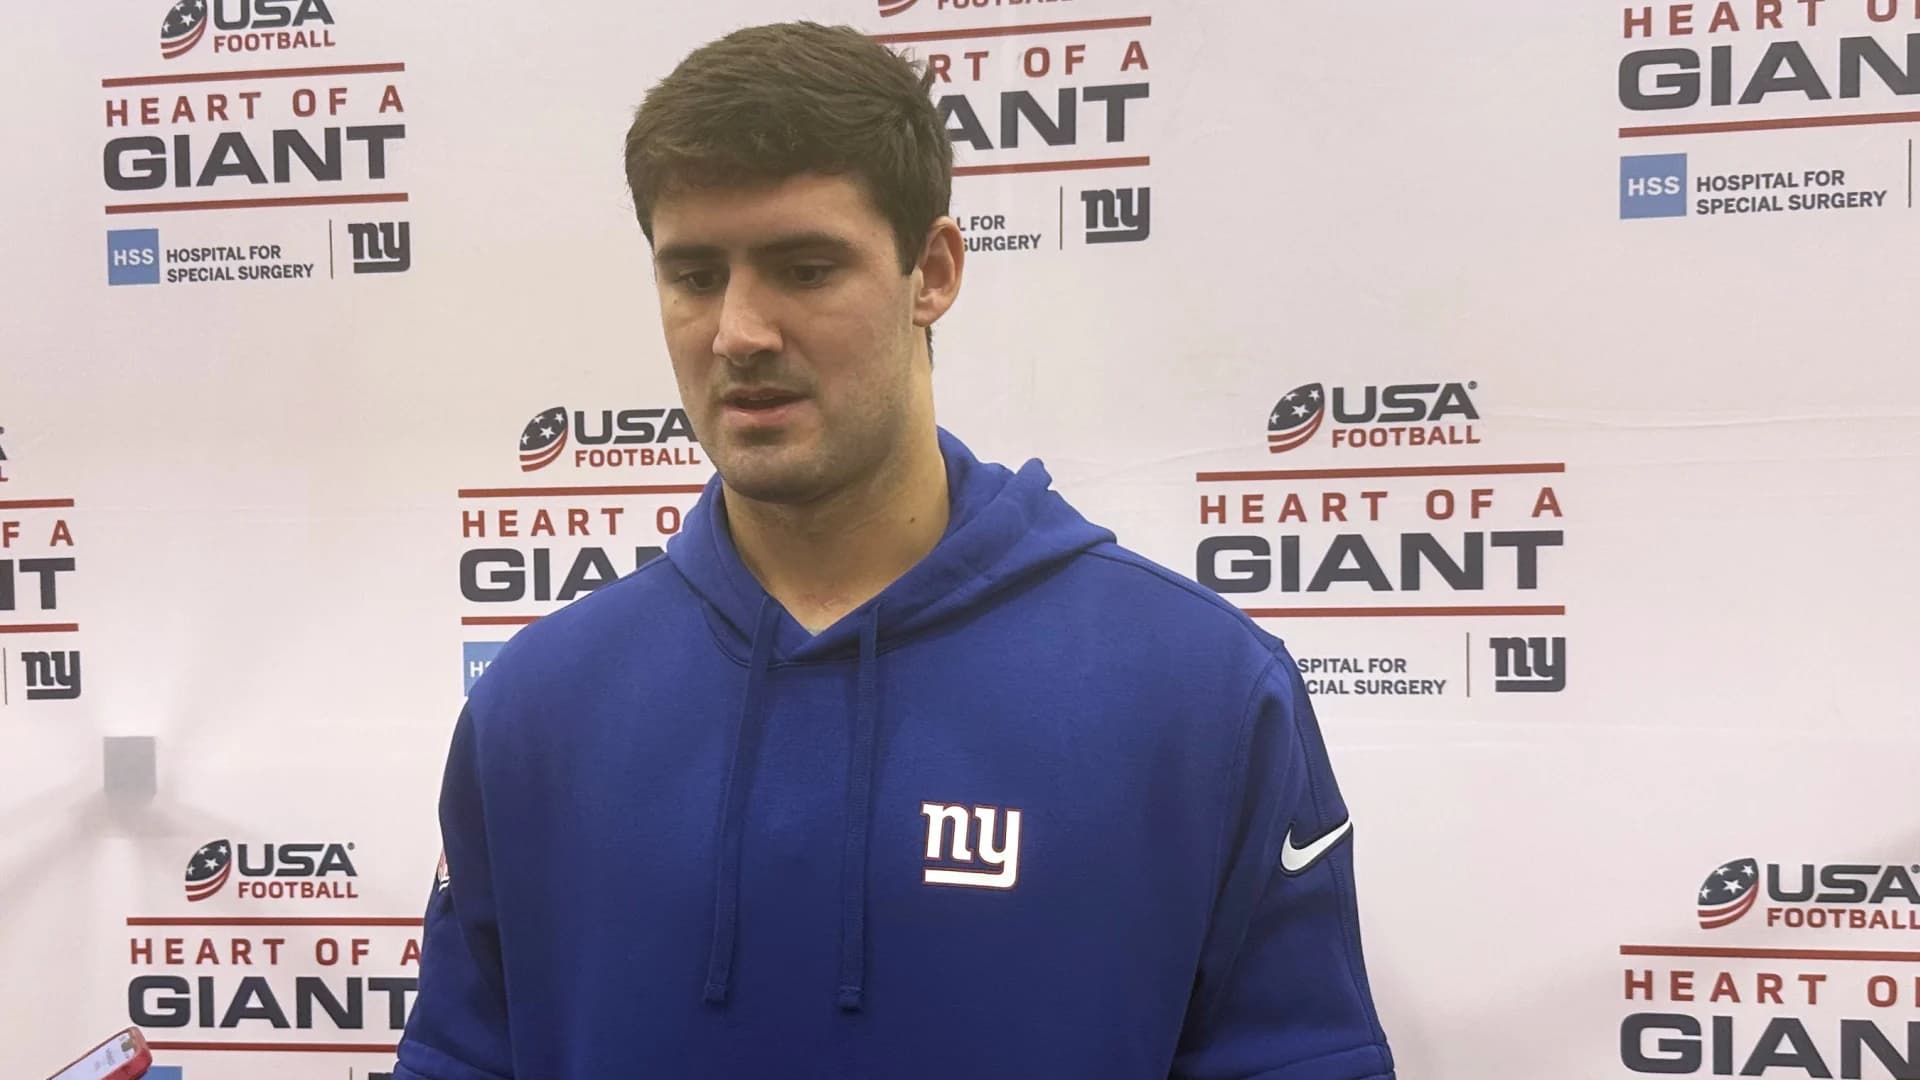 Giants quarterback Daniel Jones says knee surgery was limited to his ACL